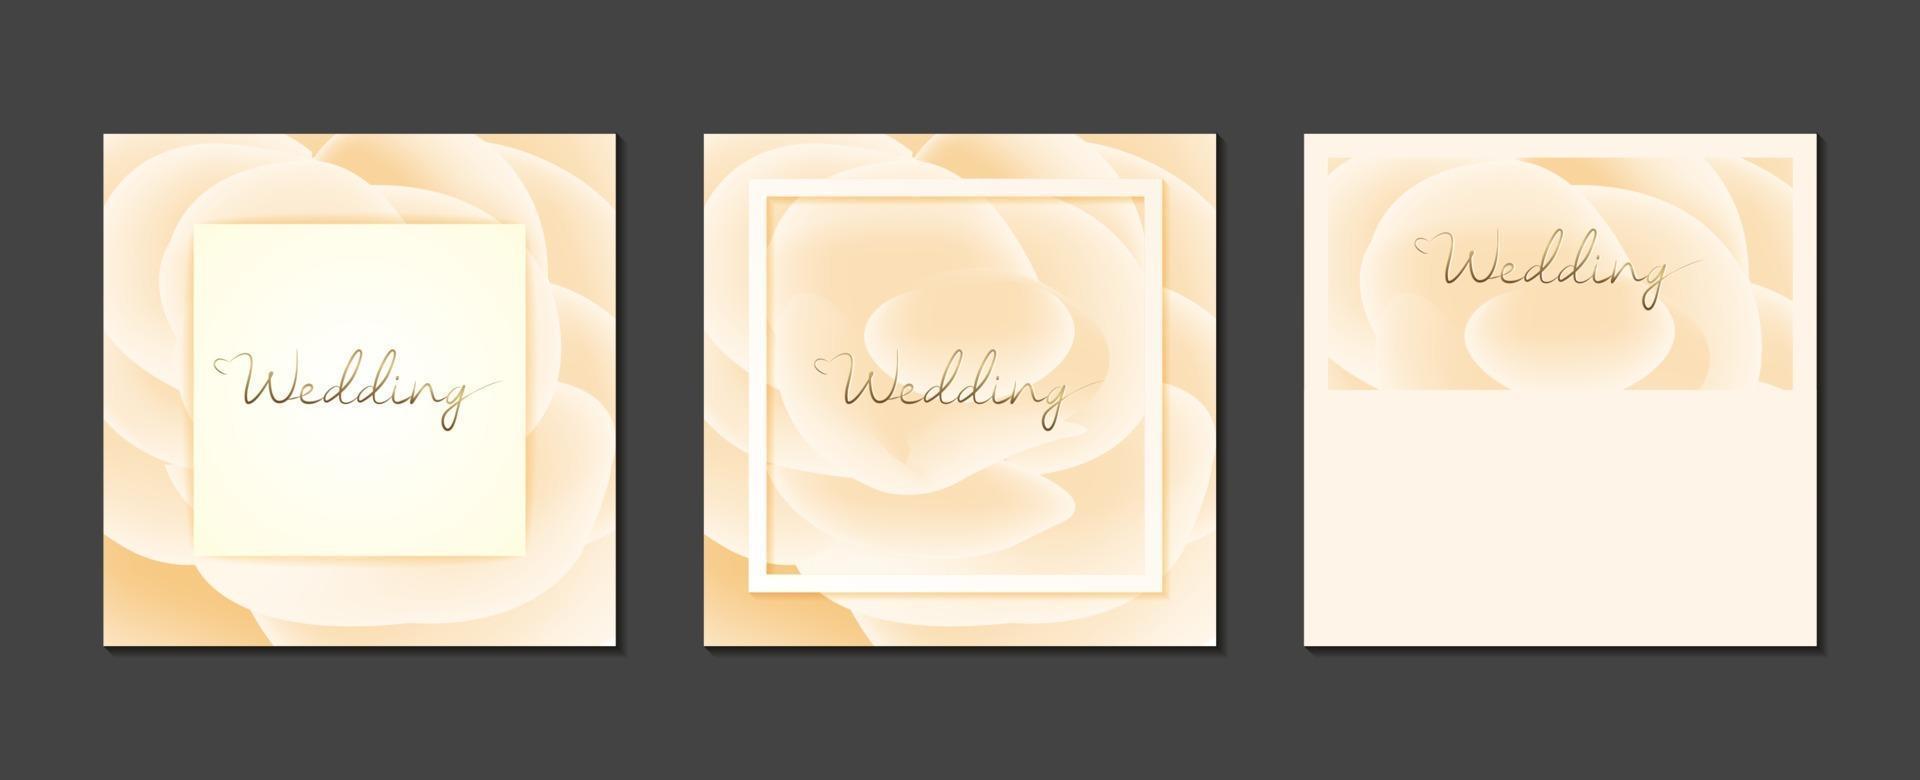 Minimal wedding invitation cards with flowers and soft colors vector